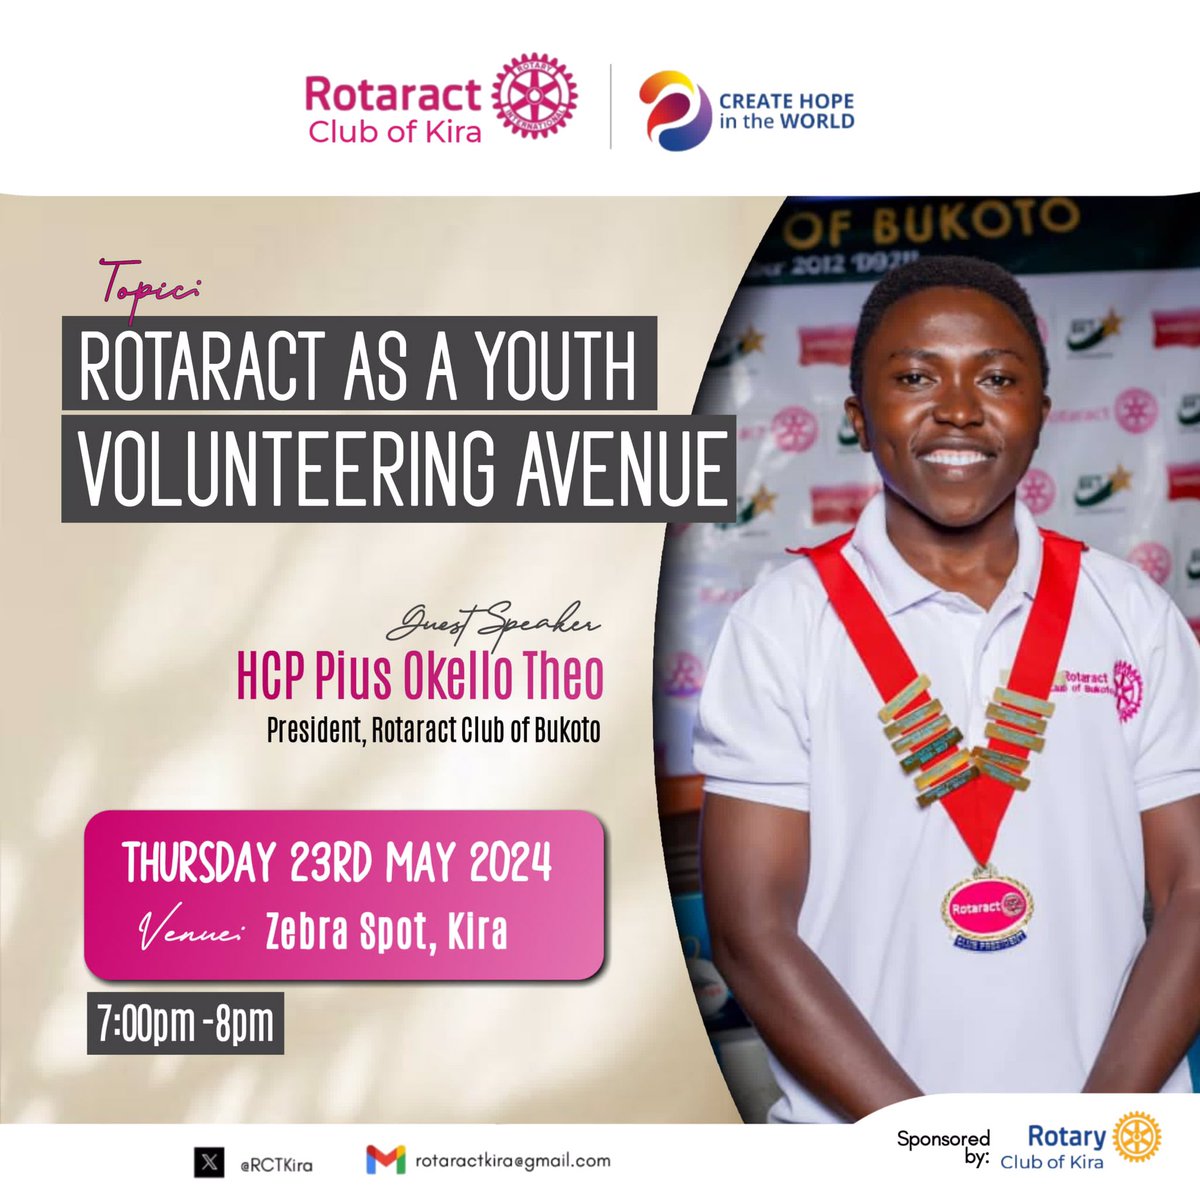 Hello 👋 

Join us this evening at Zebra spot kira 
Topic:Rotaract as a Youth Volunteering avenue 
⏰7Pm 

Join online ;
meet.google.com/khf-bchw-hia